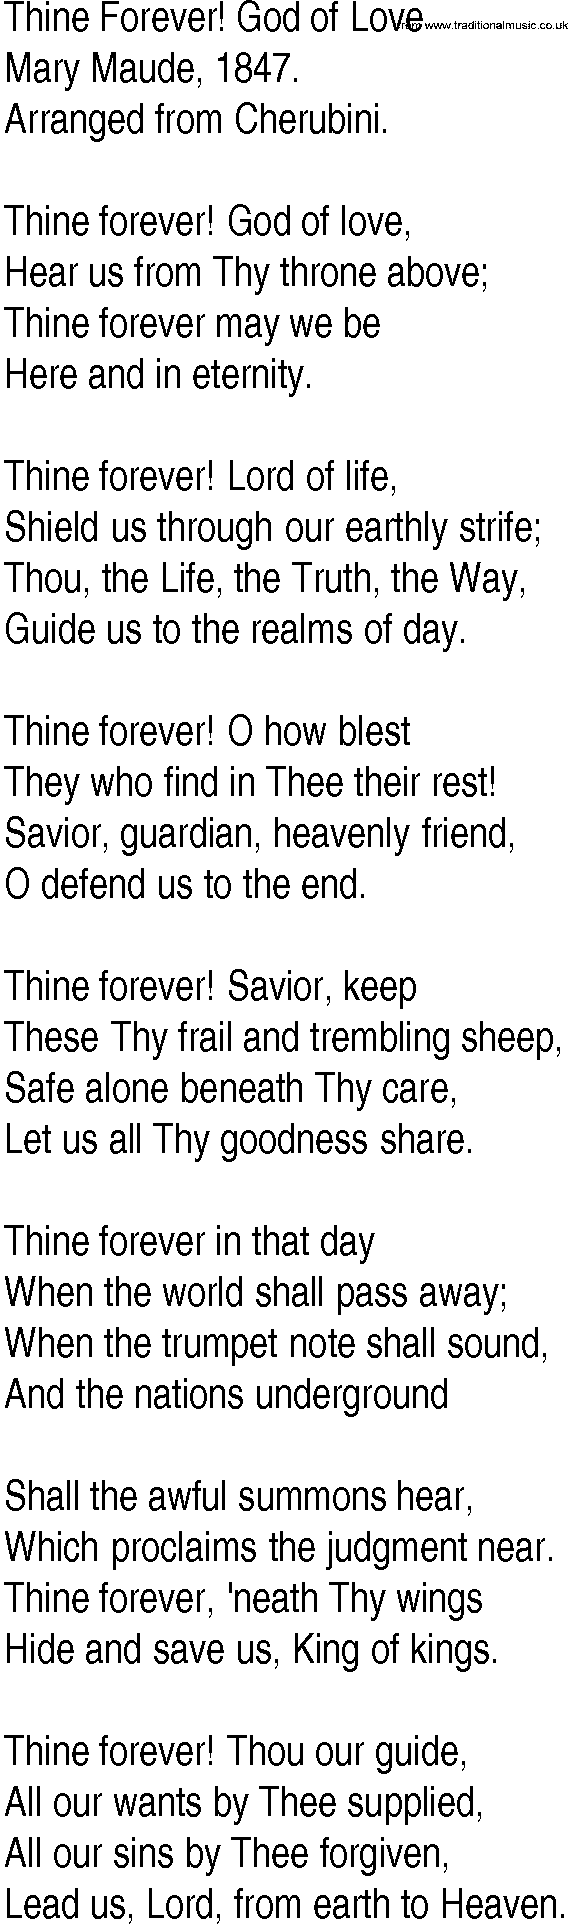 Hymn and Gospel Song: Thine Forever! God of Love by Mary Maude lyrics